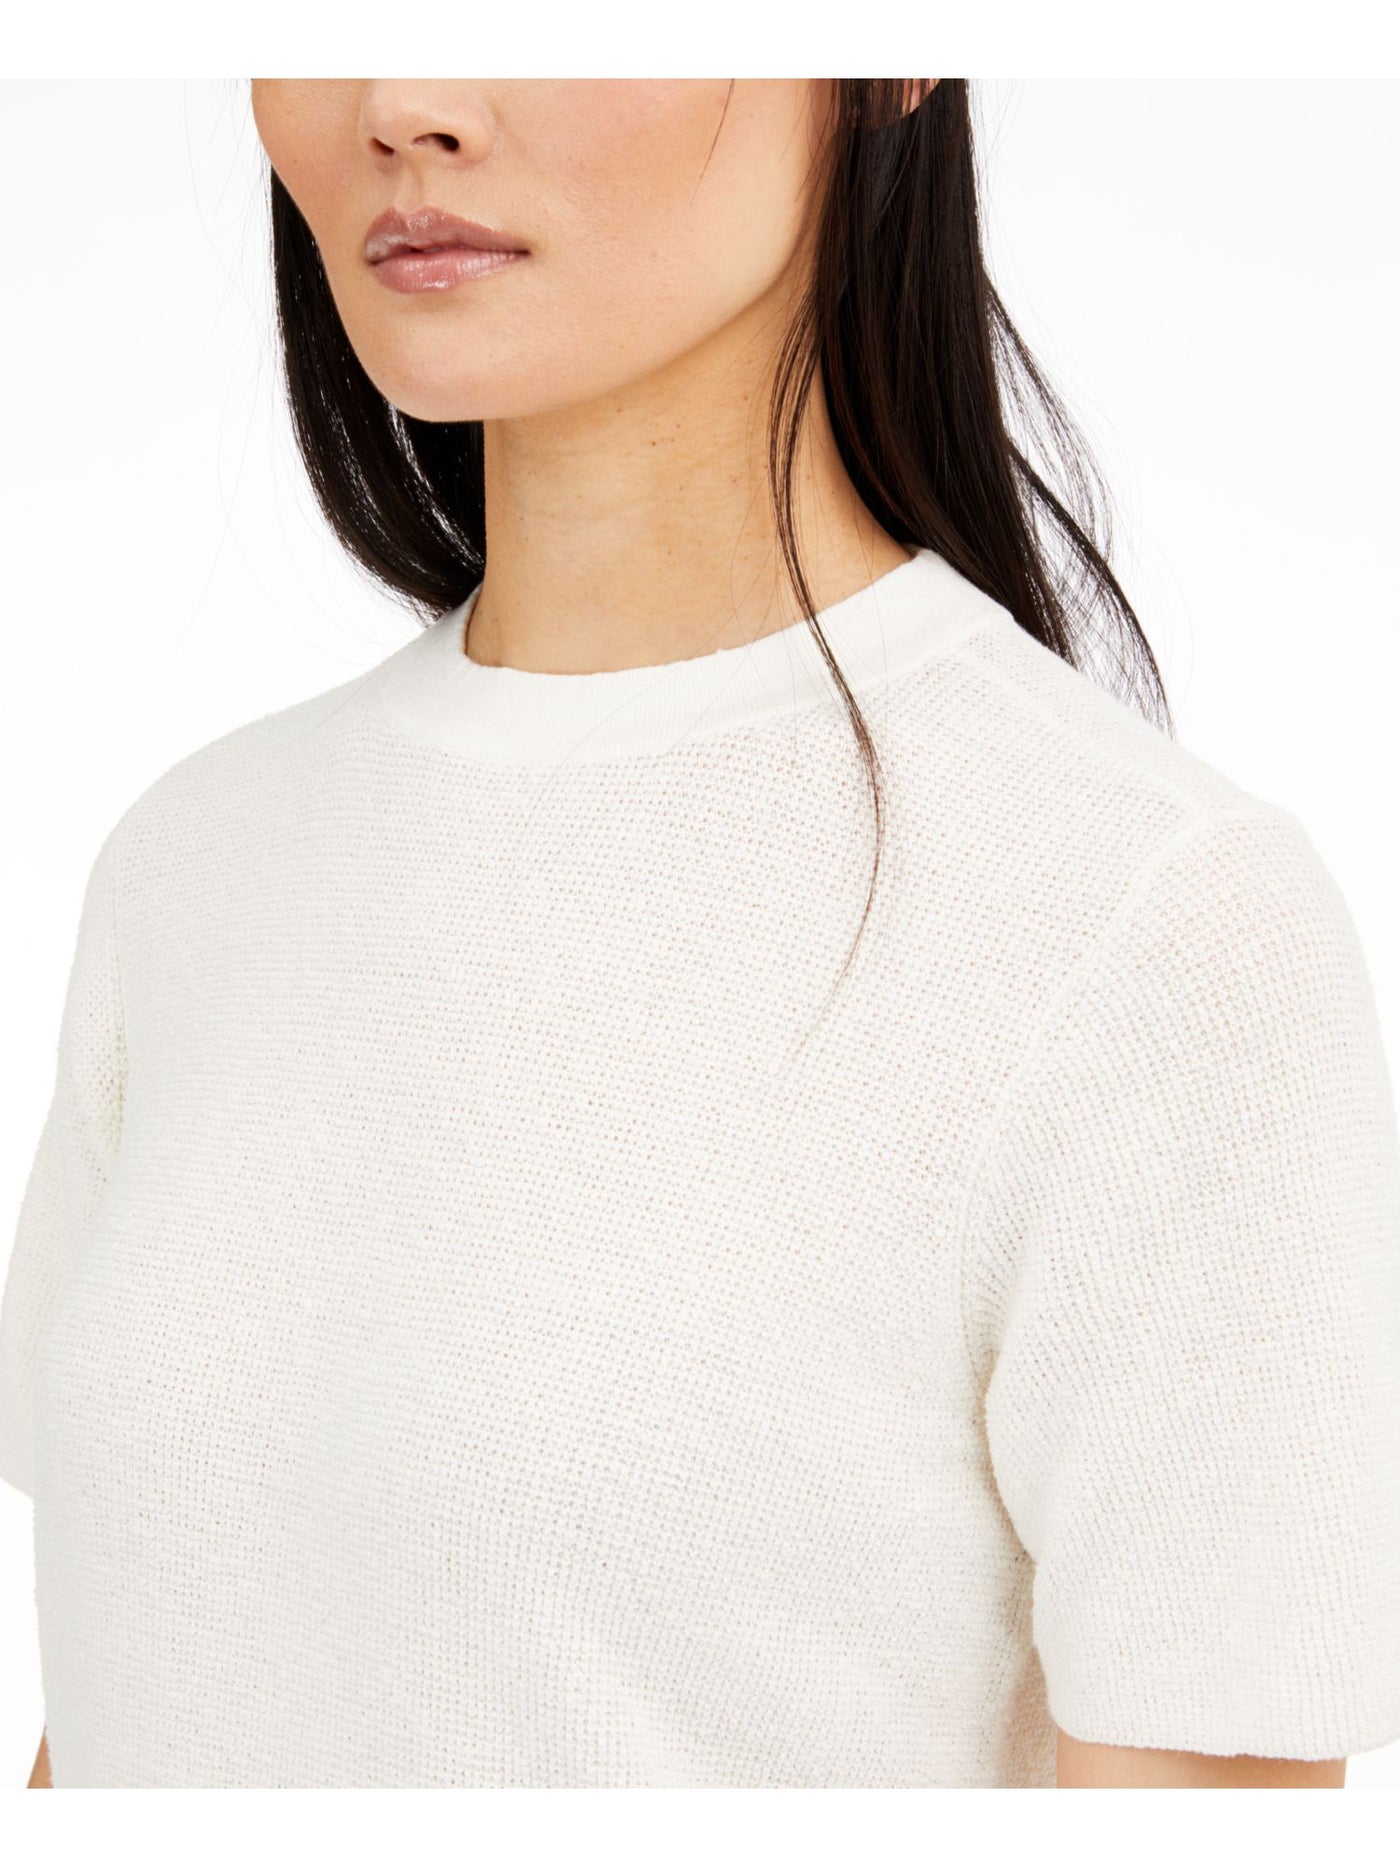 EILEEN FISHER Womens Ivory Textured High-low Short Sleeve Crew Neck Tunic Sweater Petites PM